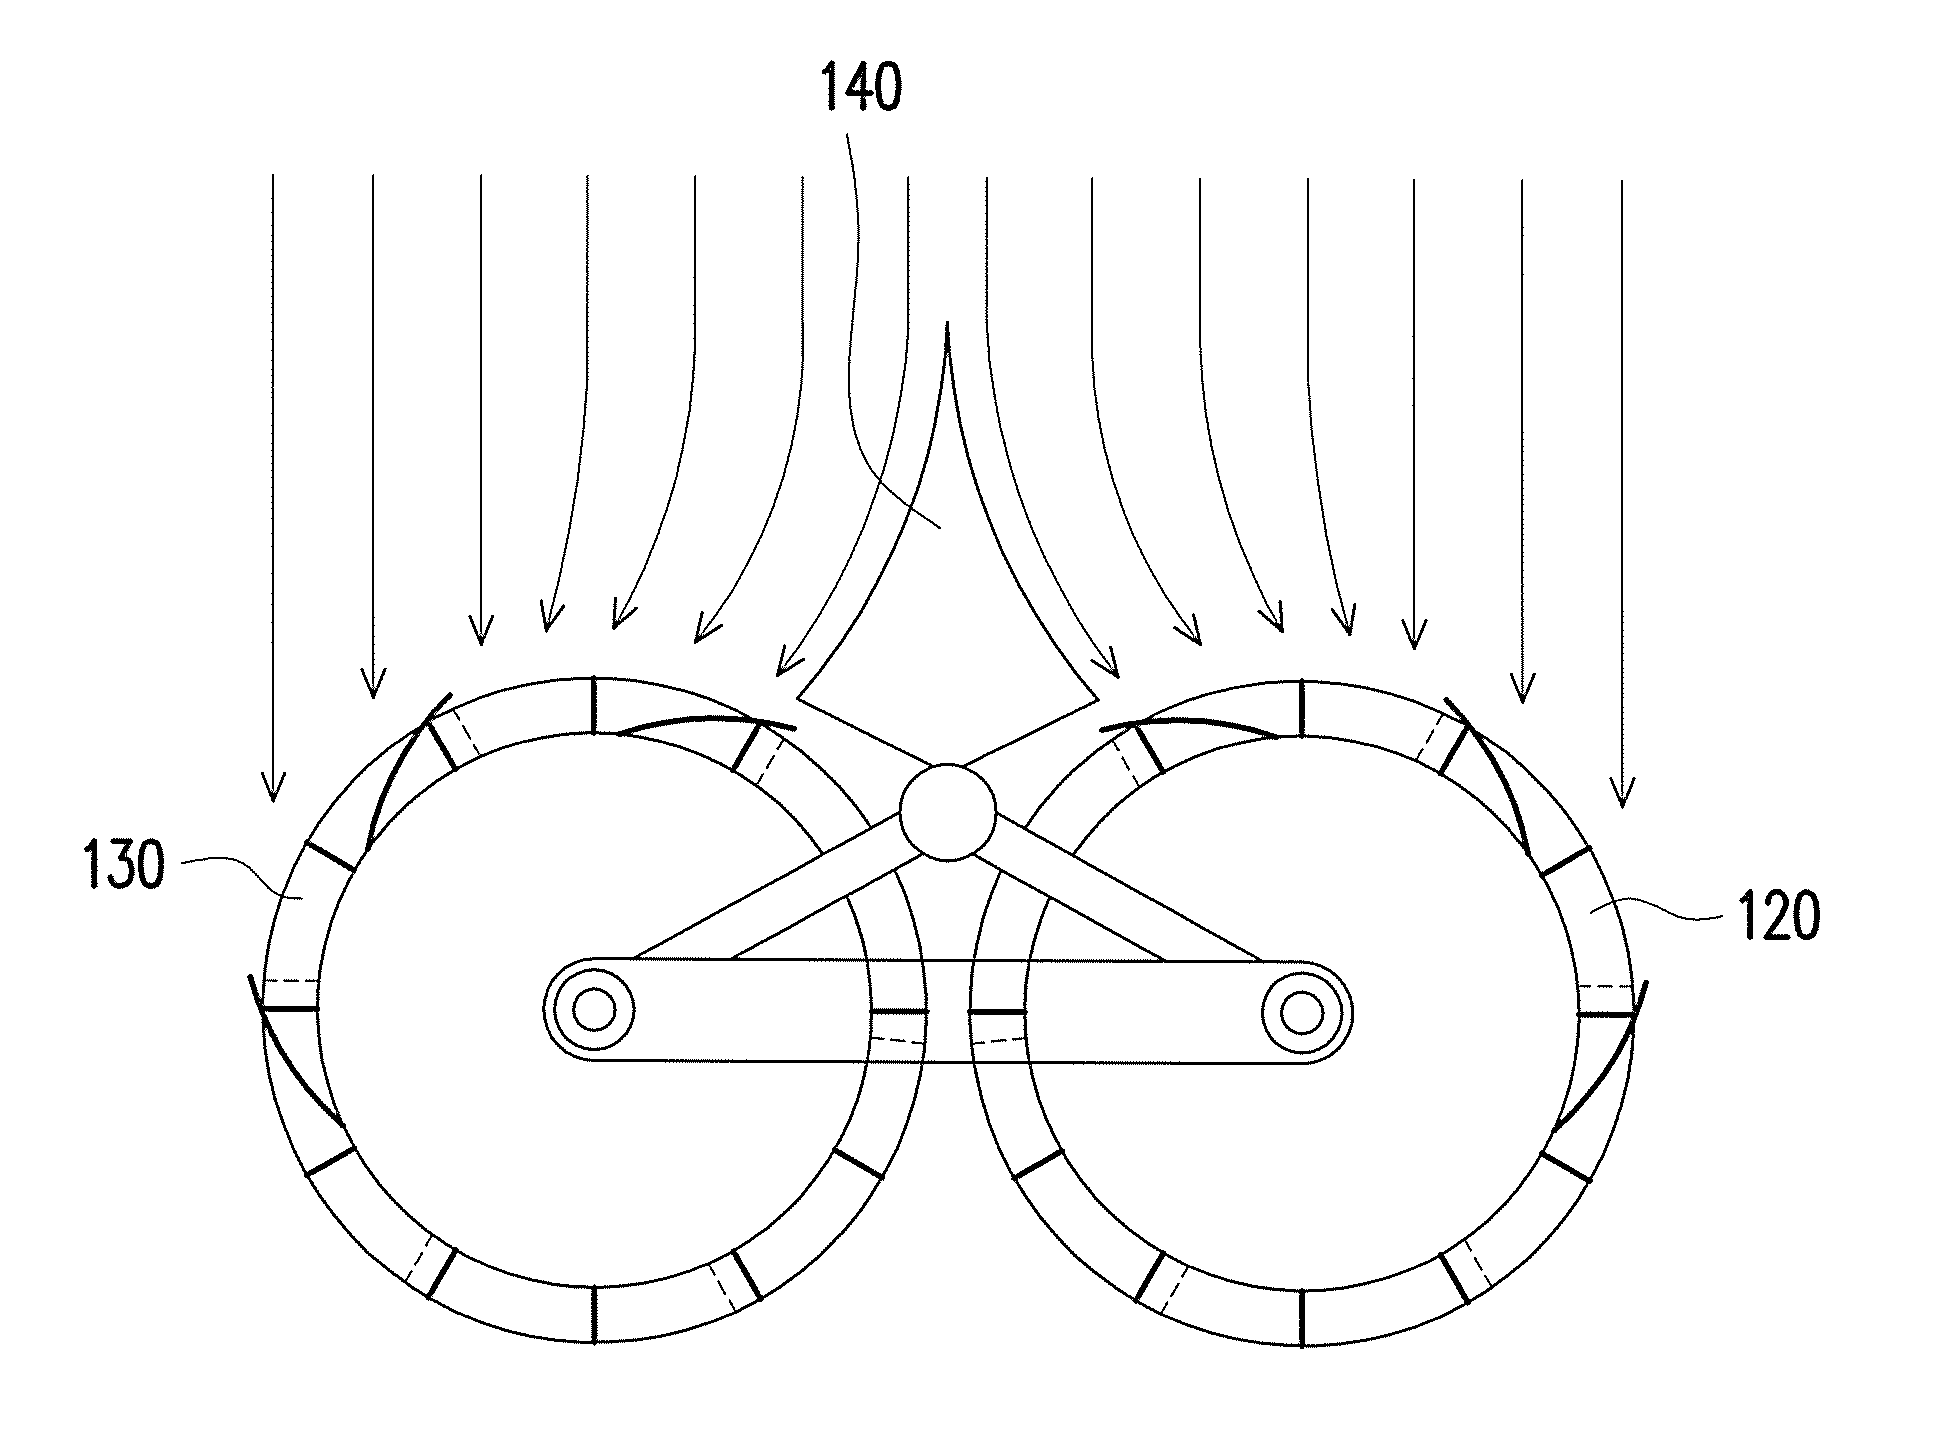 Eccentric dual rotor assembly for wind power generation